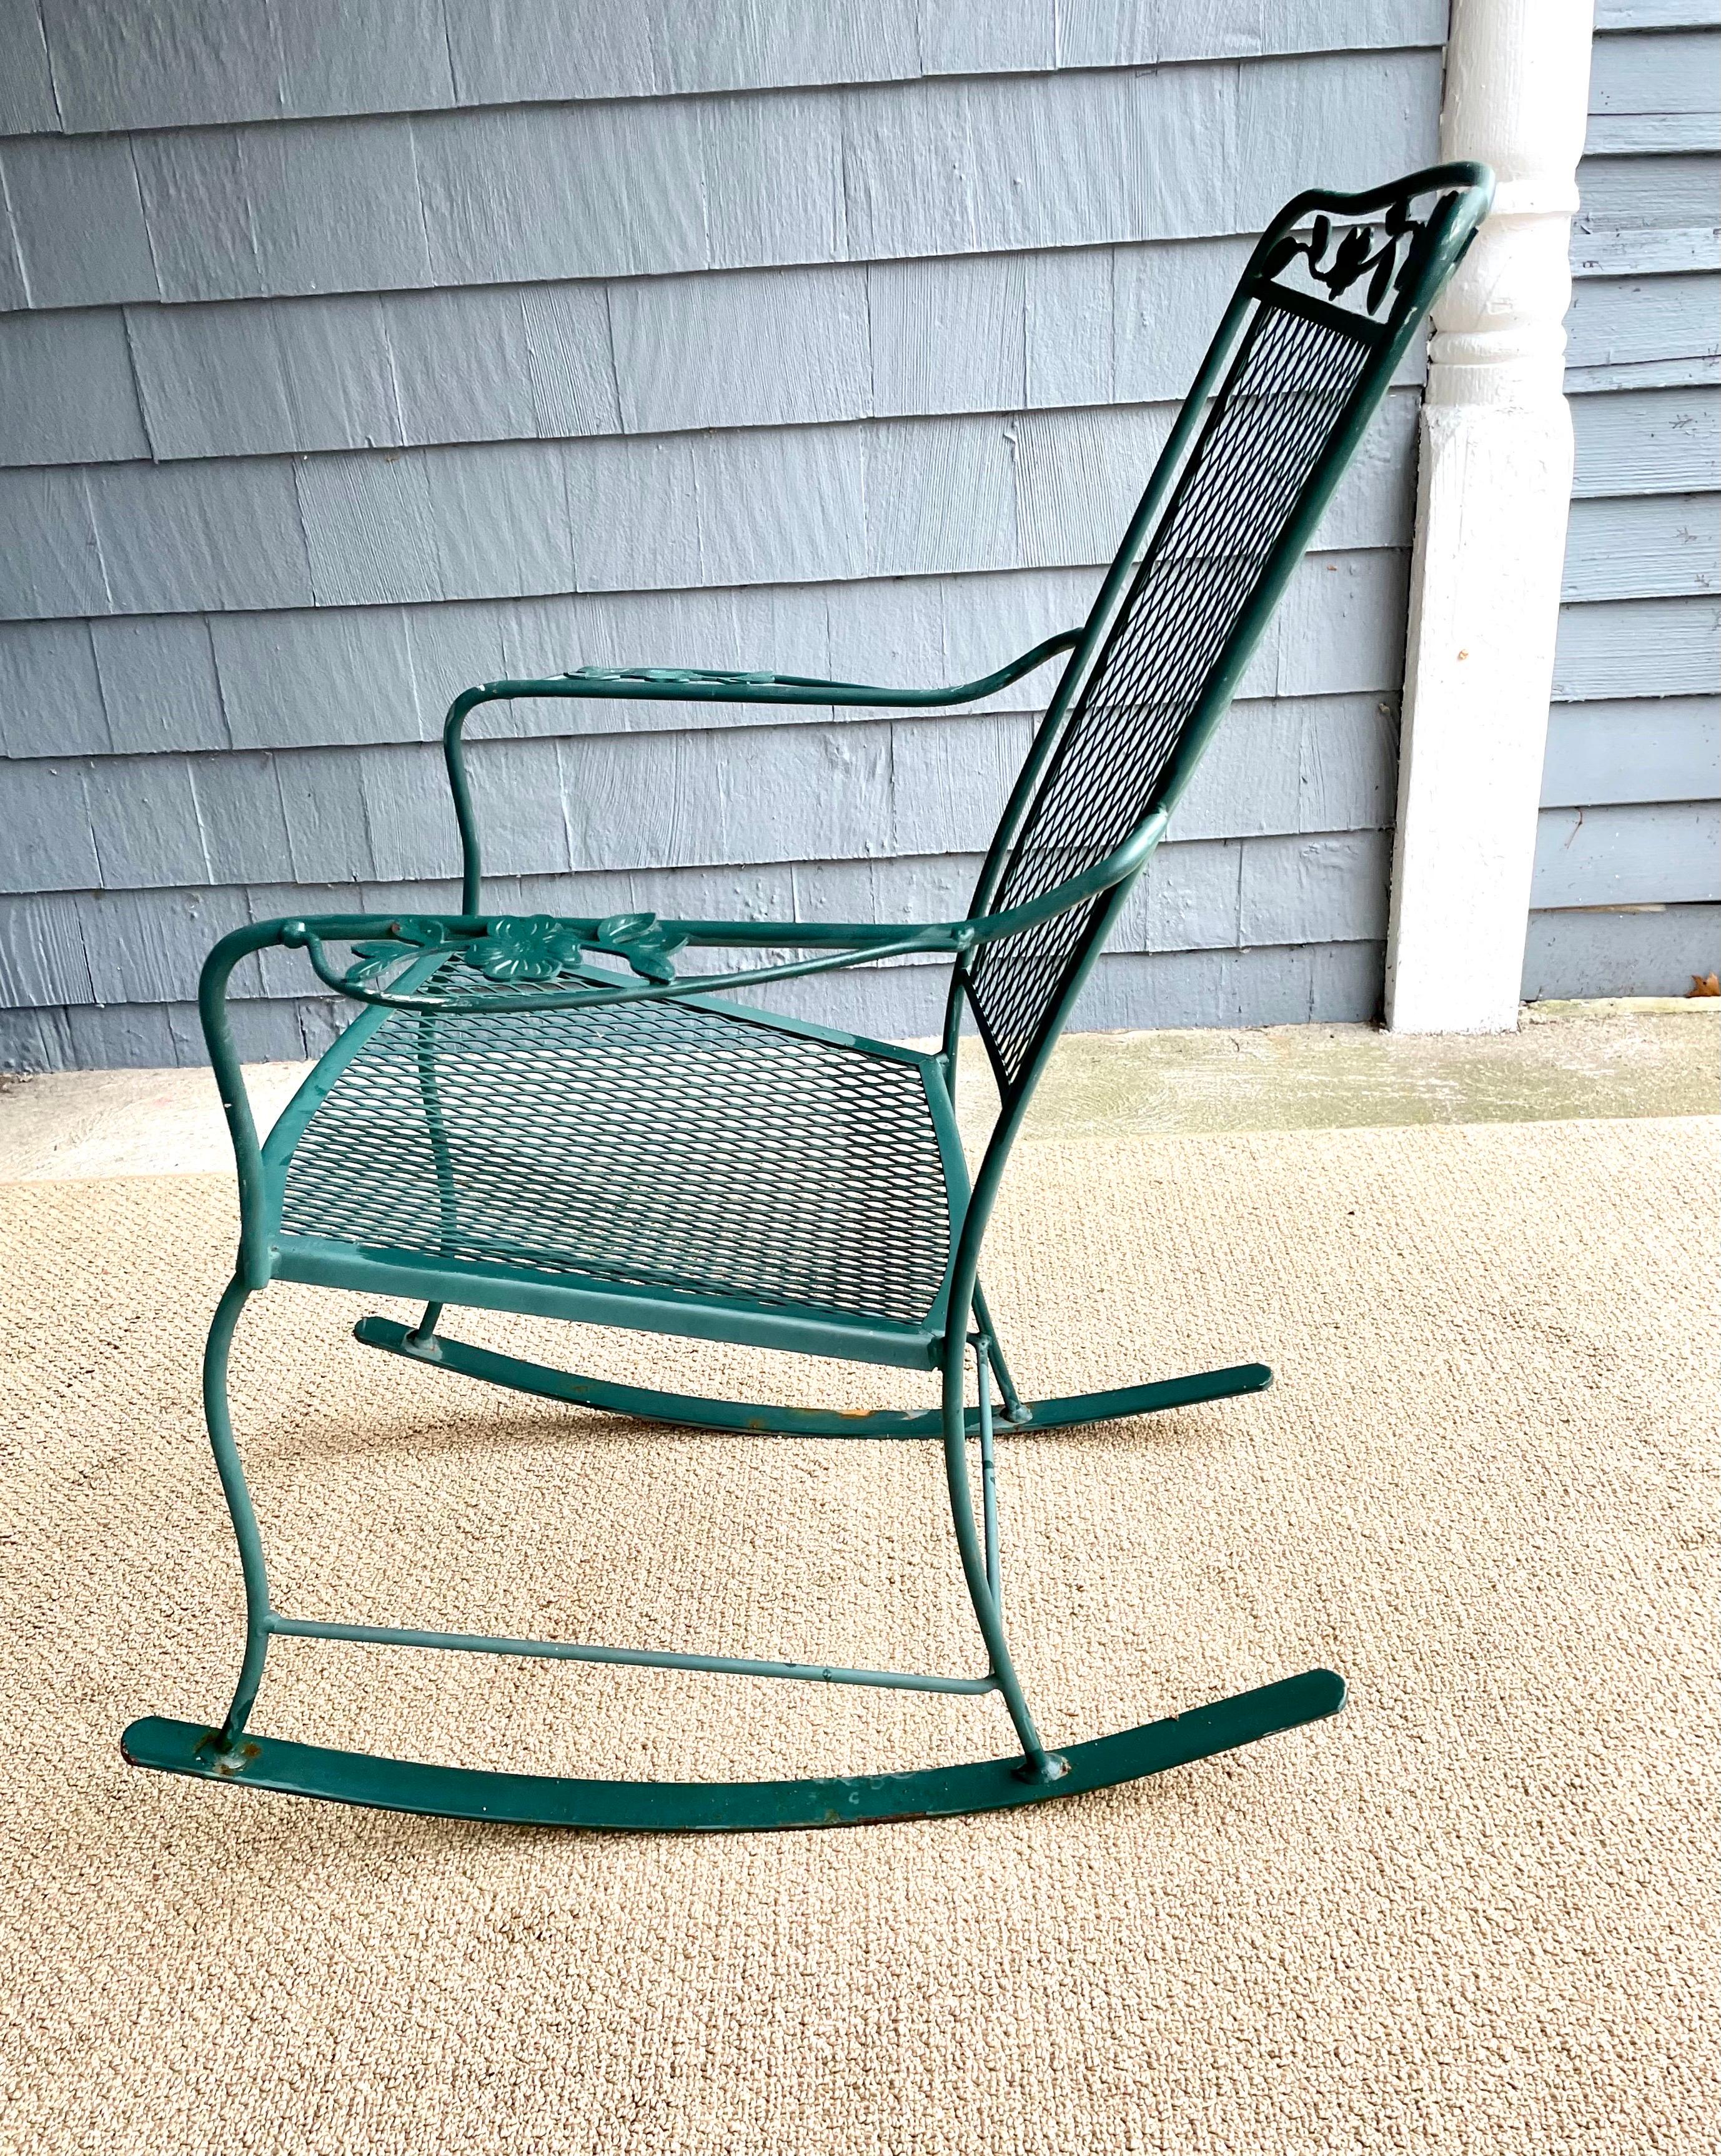 20th Century Wrought Iron Outdoor Patio Rocker Arm Chair For Sale